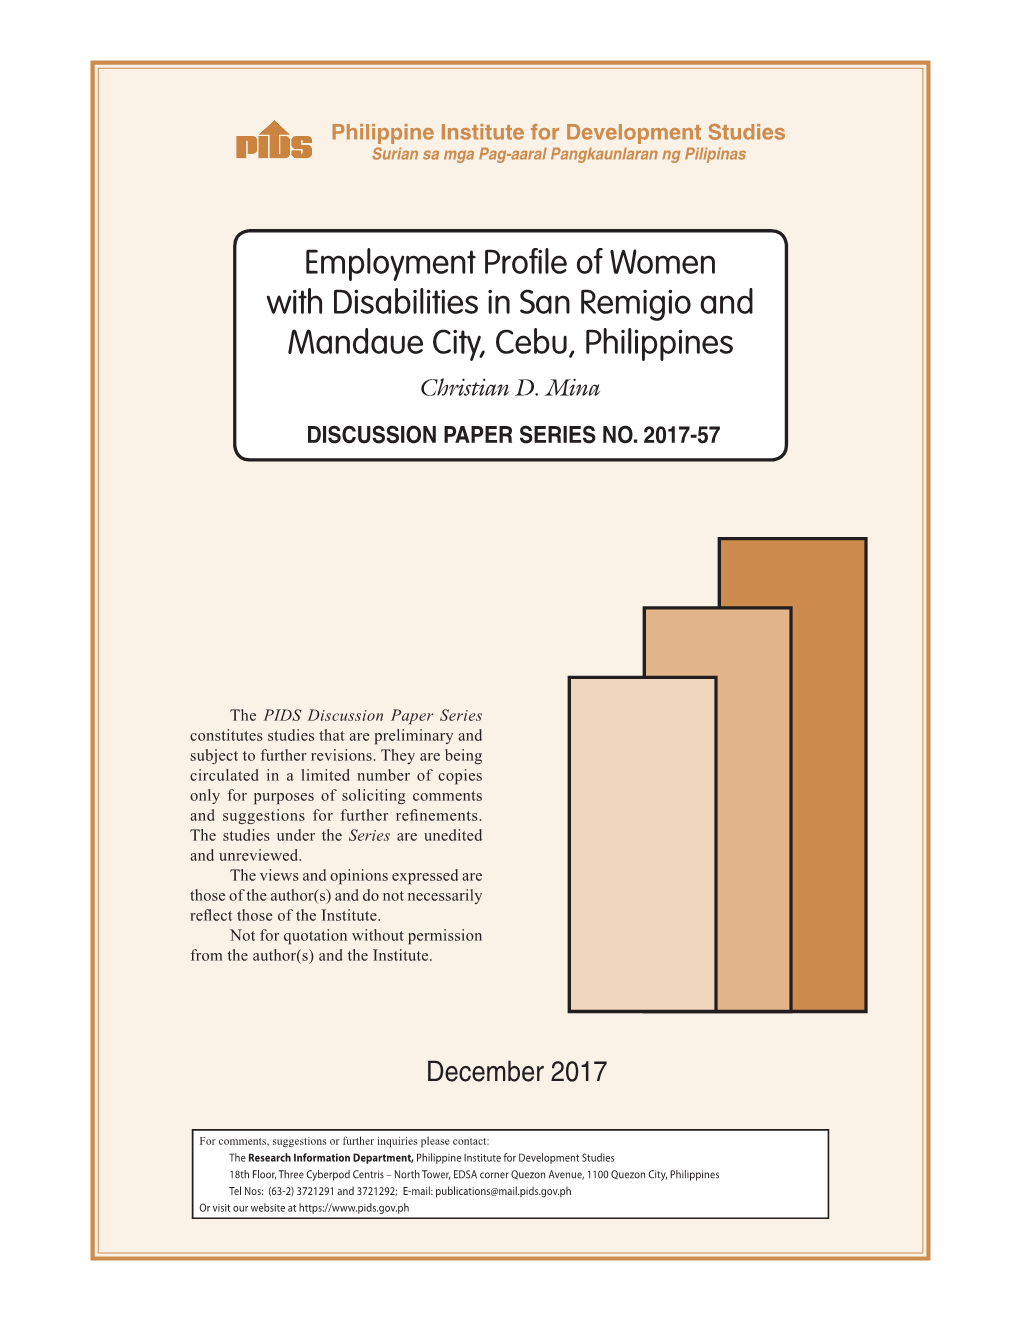 Employment Profile of Women with Disabilities in San Remigio and Mandaue City, Cebu, Philippines Christian D